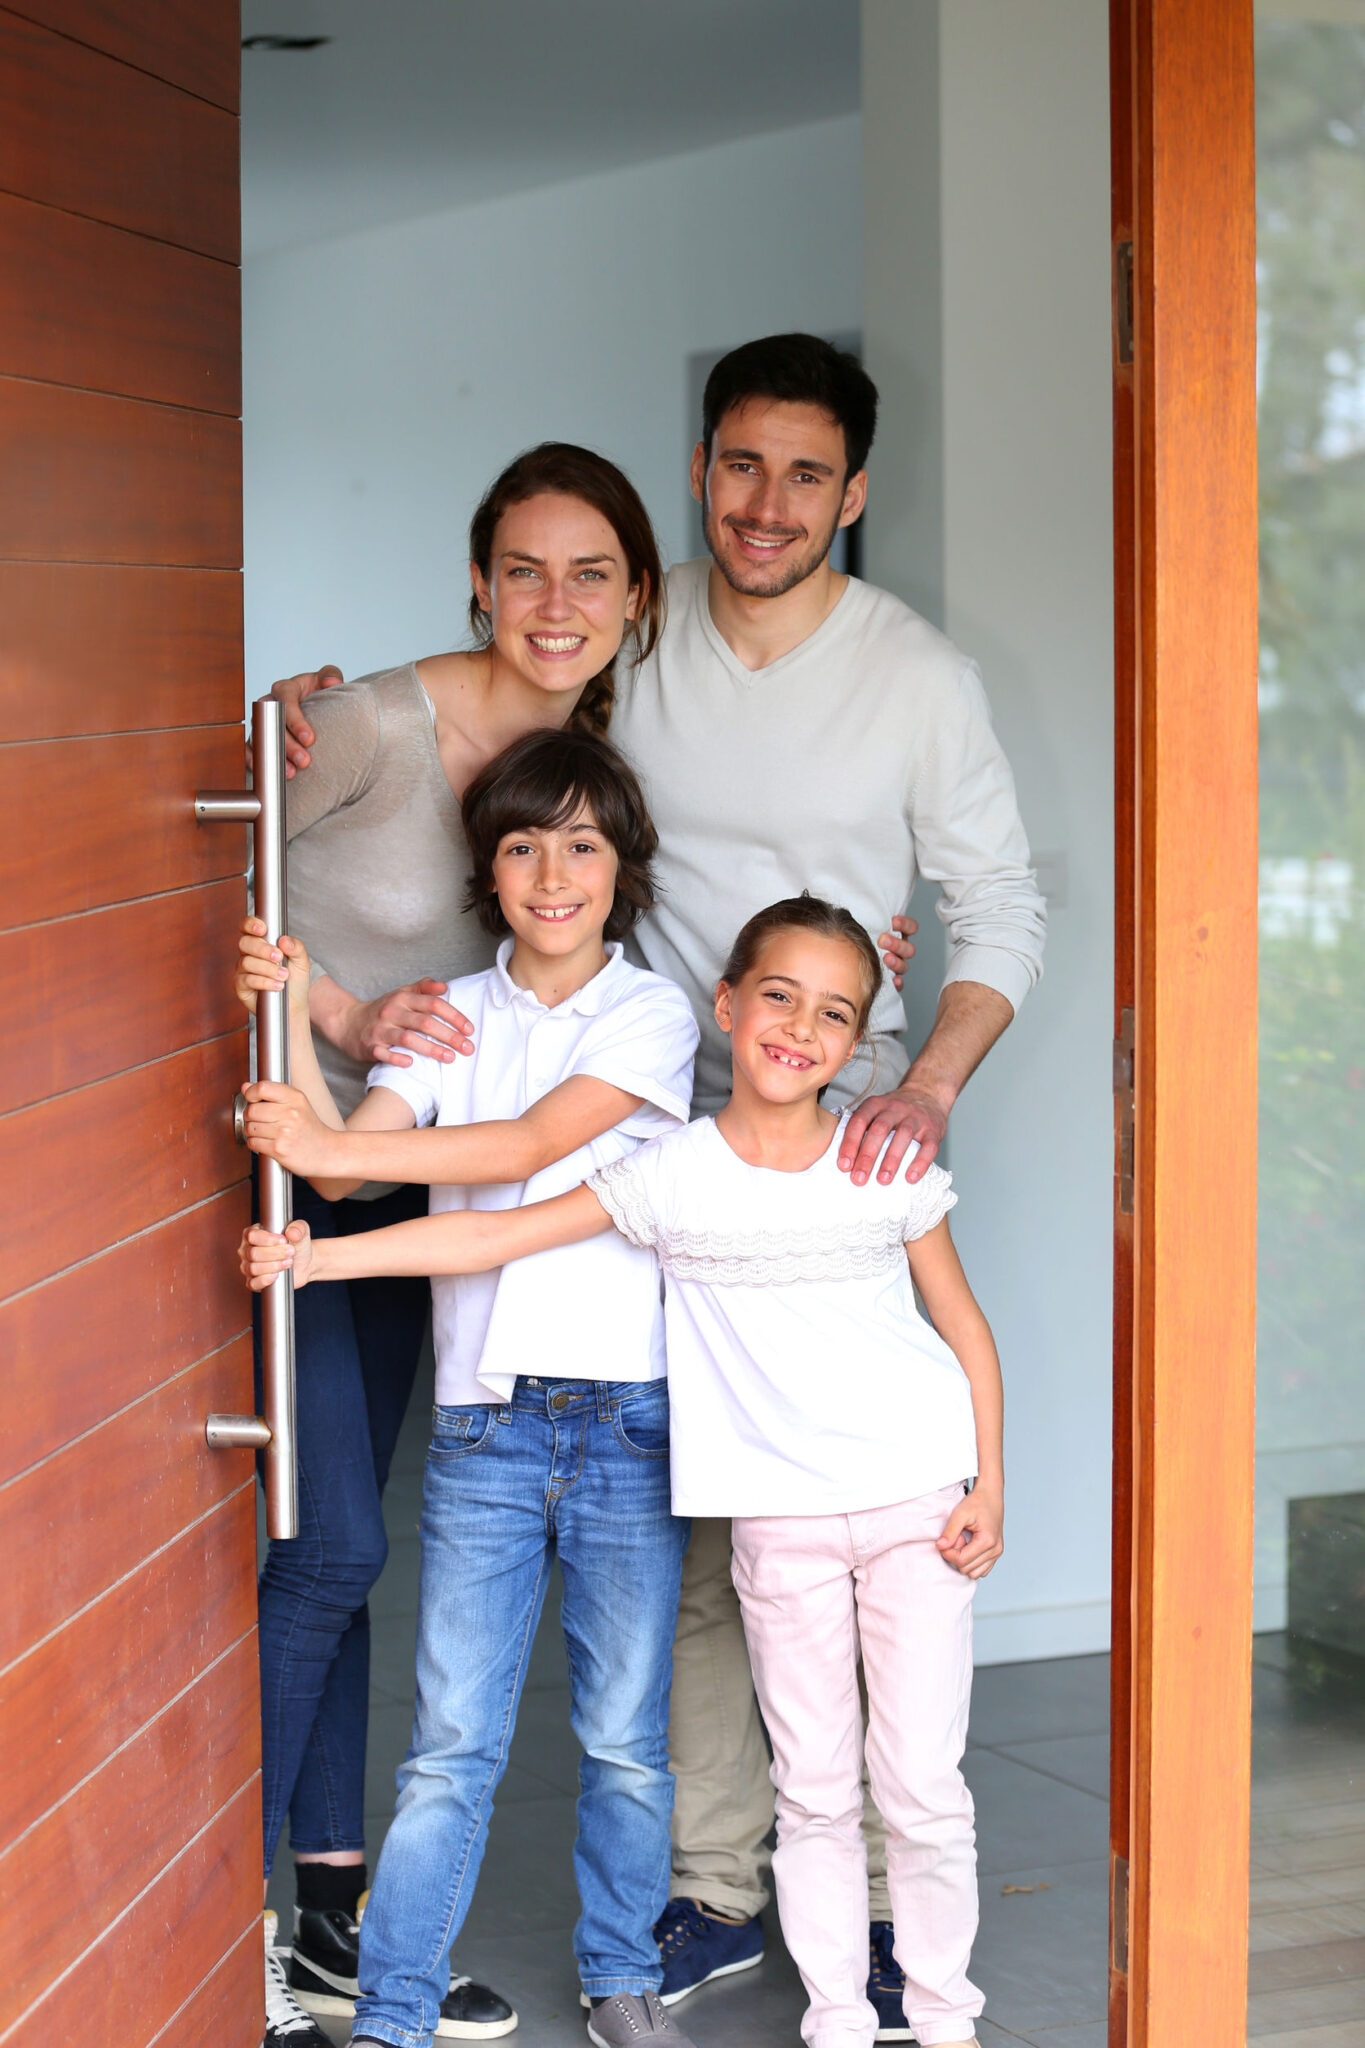 Family happy to welcome people in brand new home